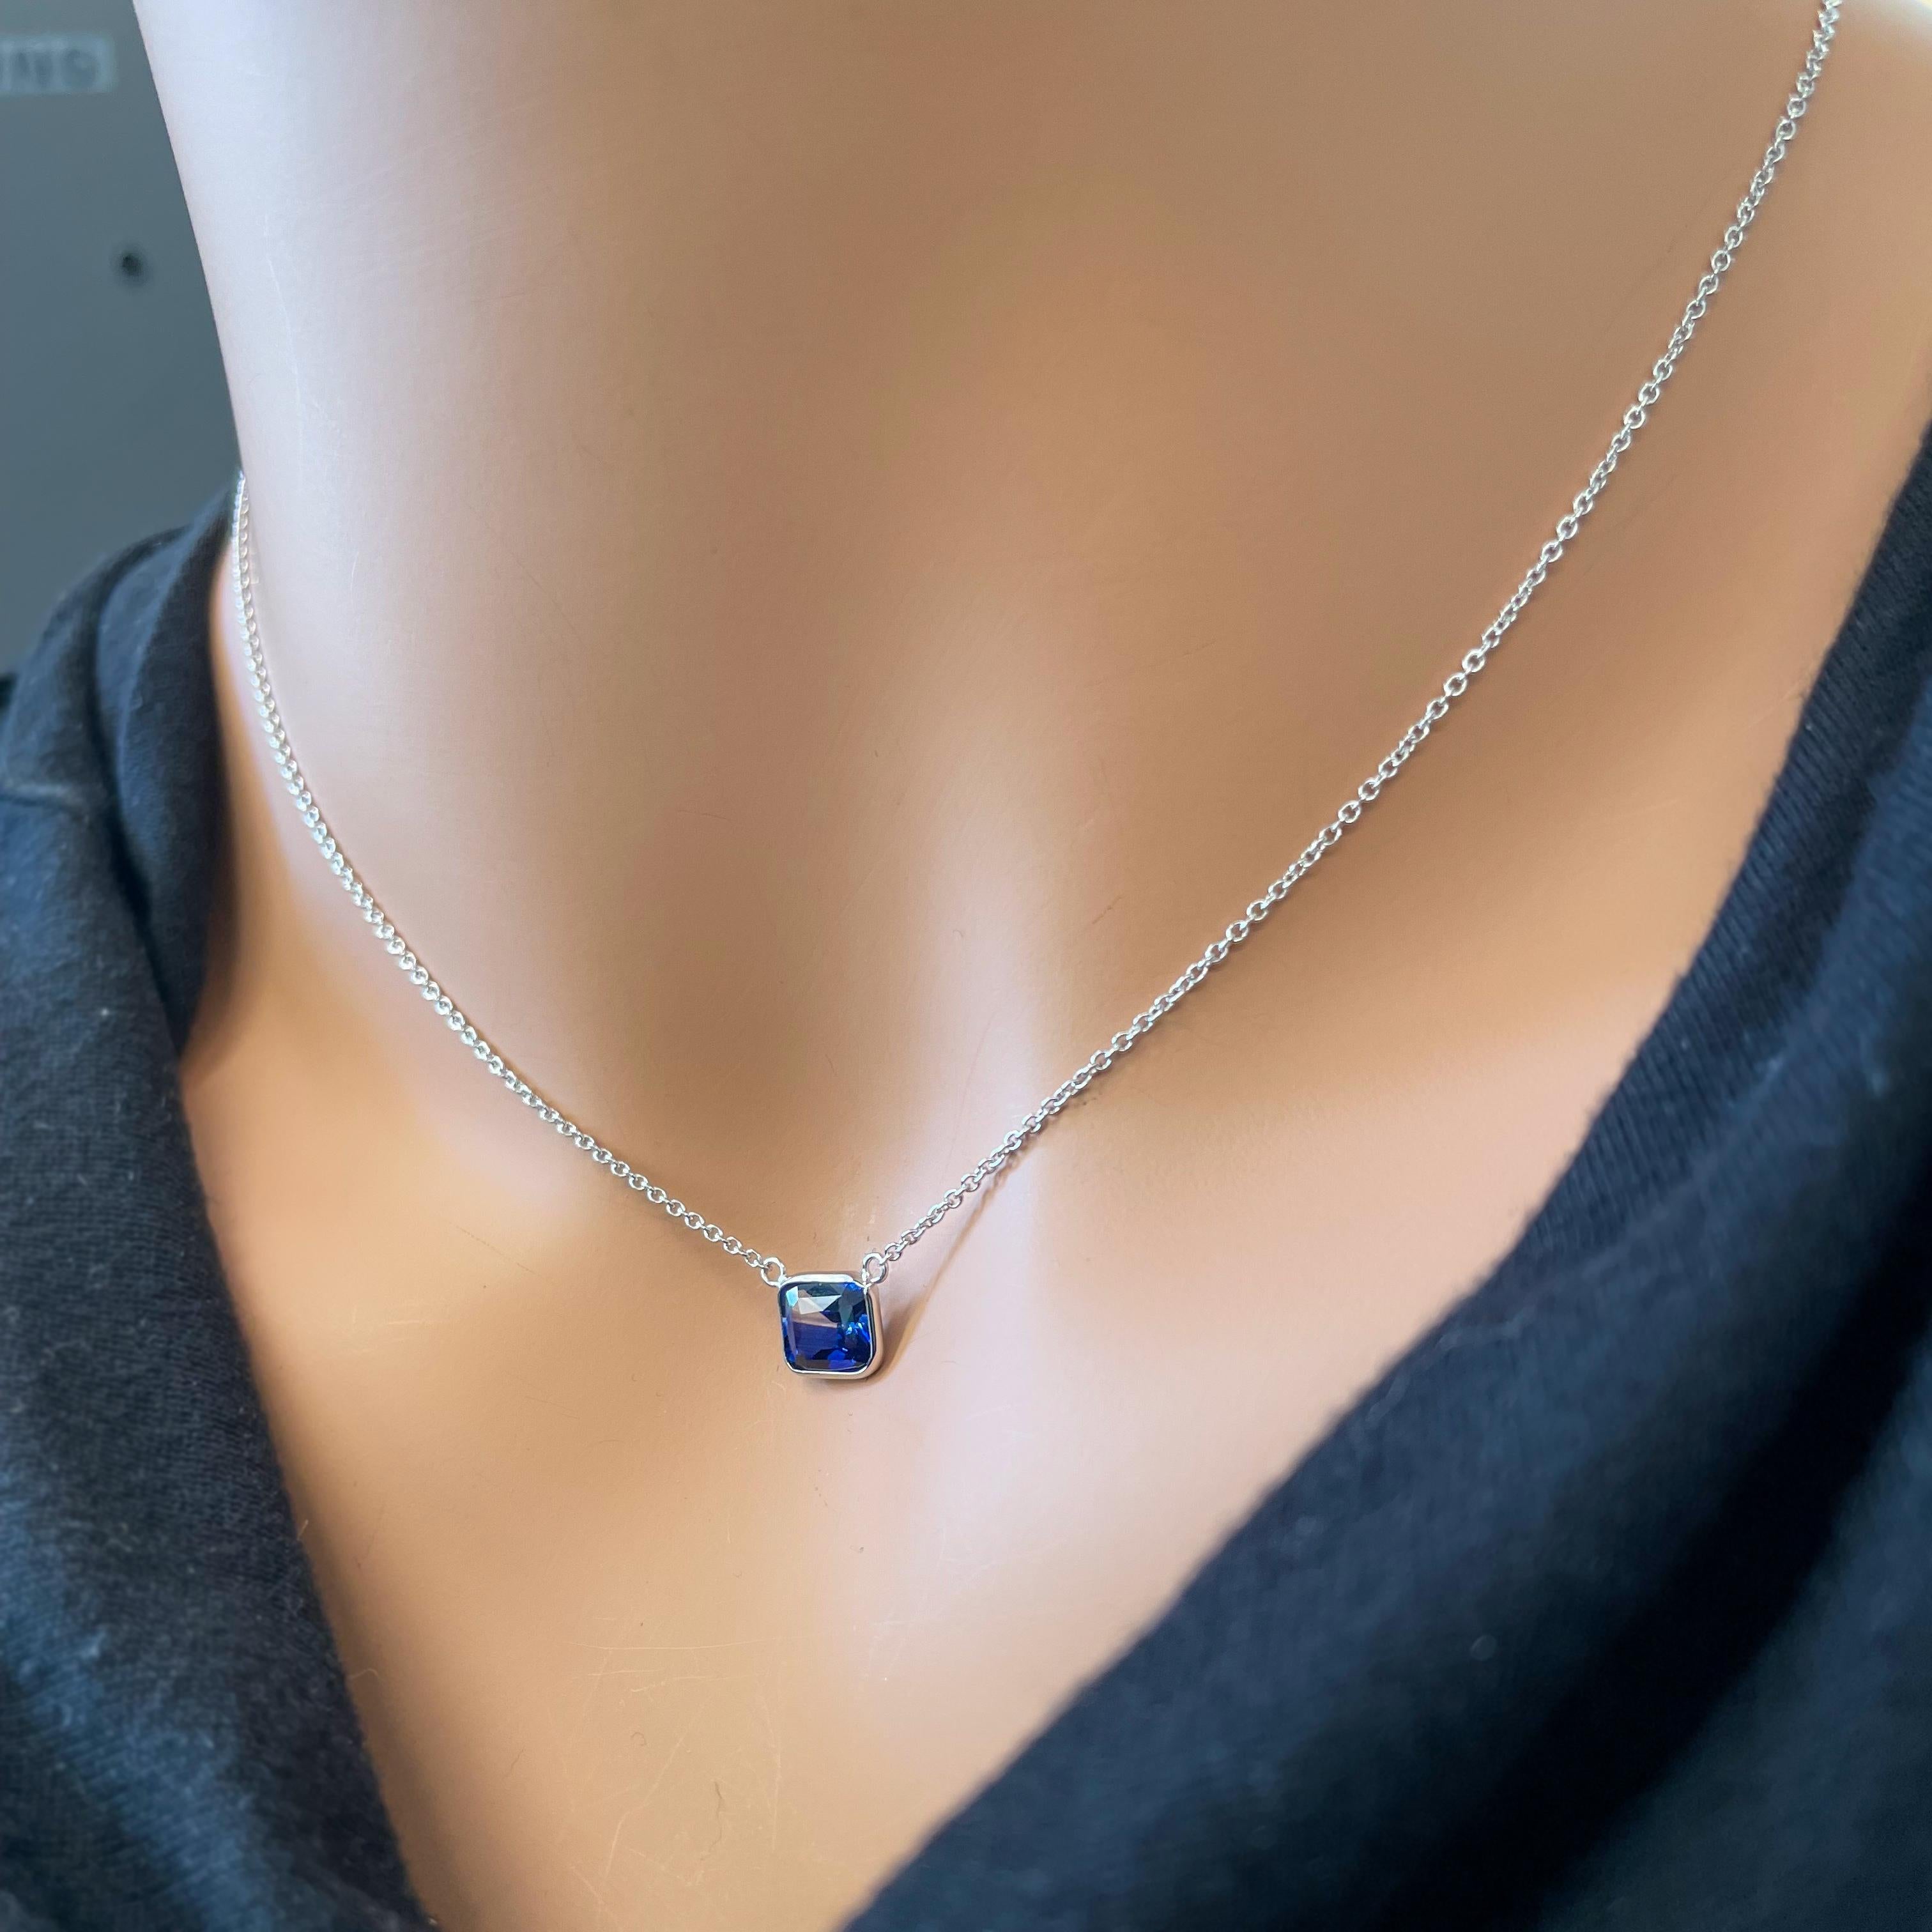 Contemporary 1.80 Carat Blue Octagonal Cut Sapphire Fashion Necklaces In 14K White Gold  For Sale